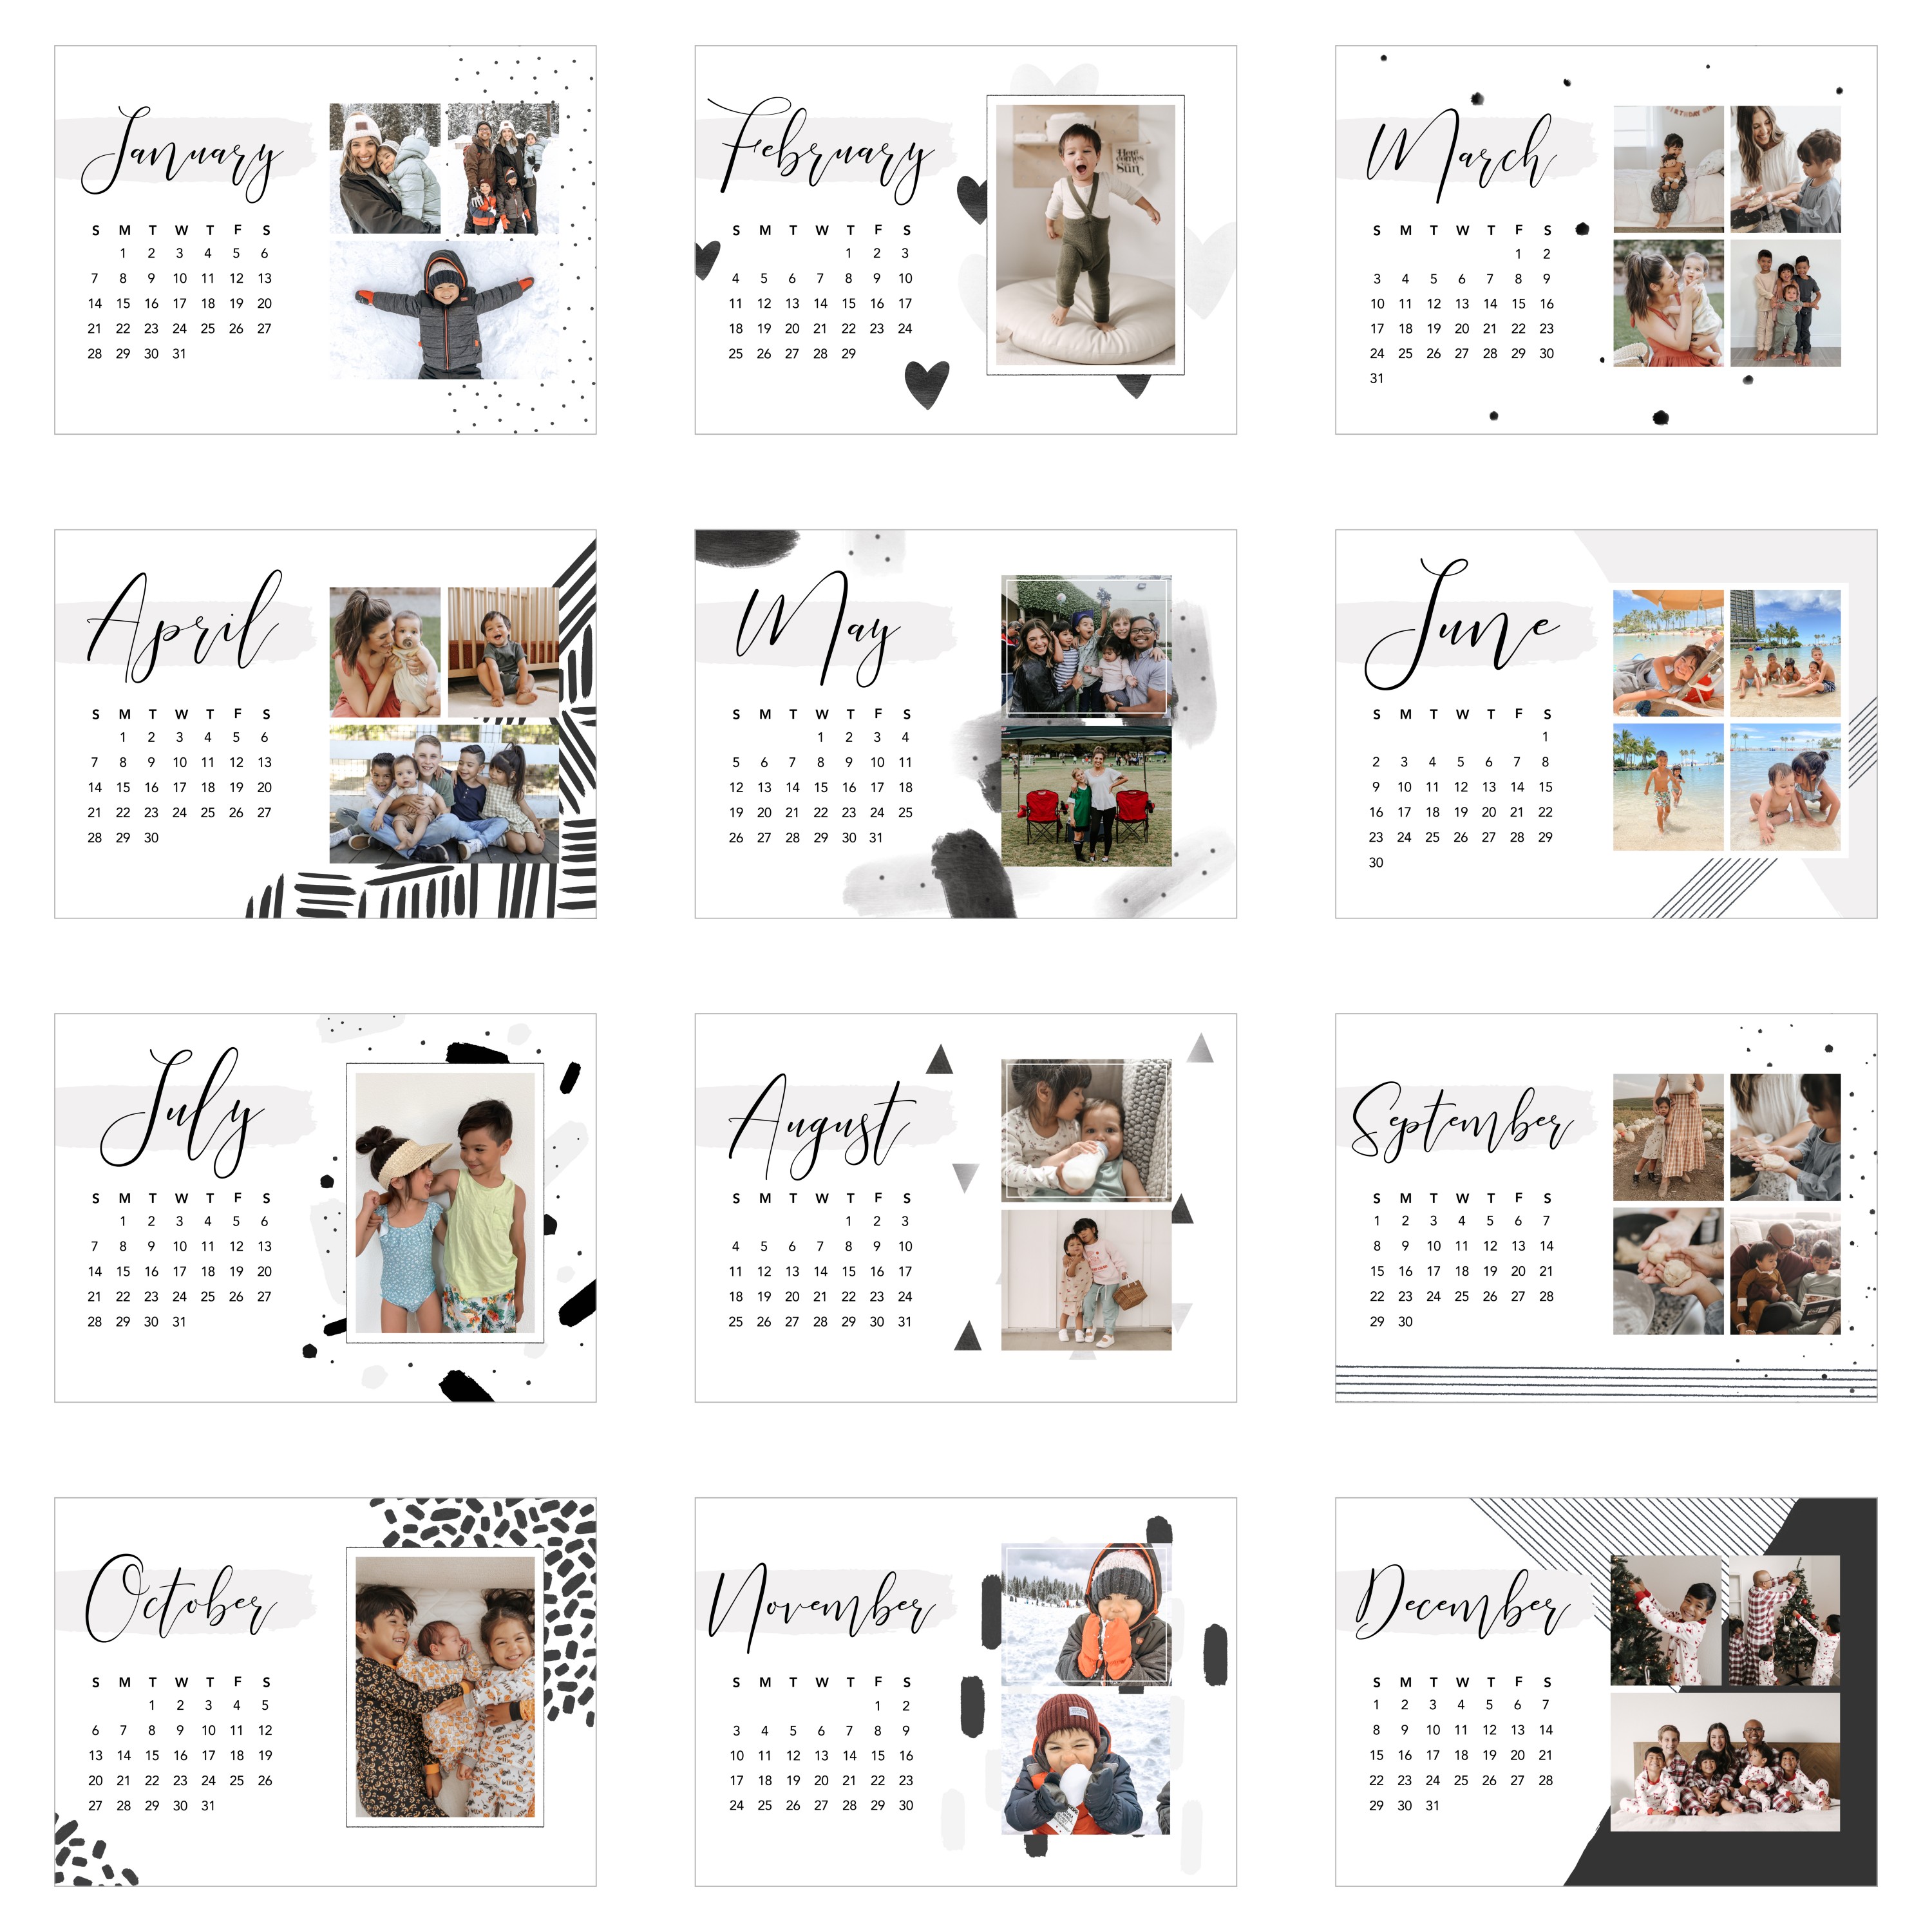 Black & White Patterns Easel Calendar by Yours Truly | Shutterfly